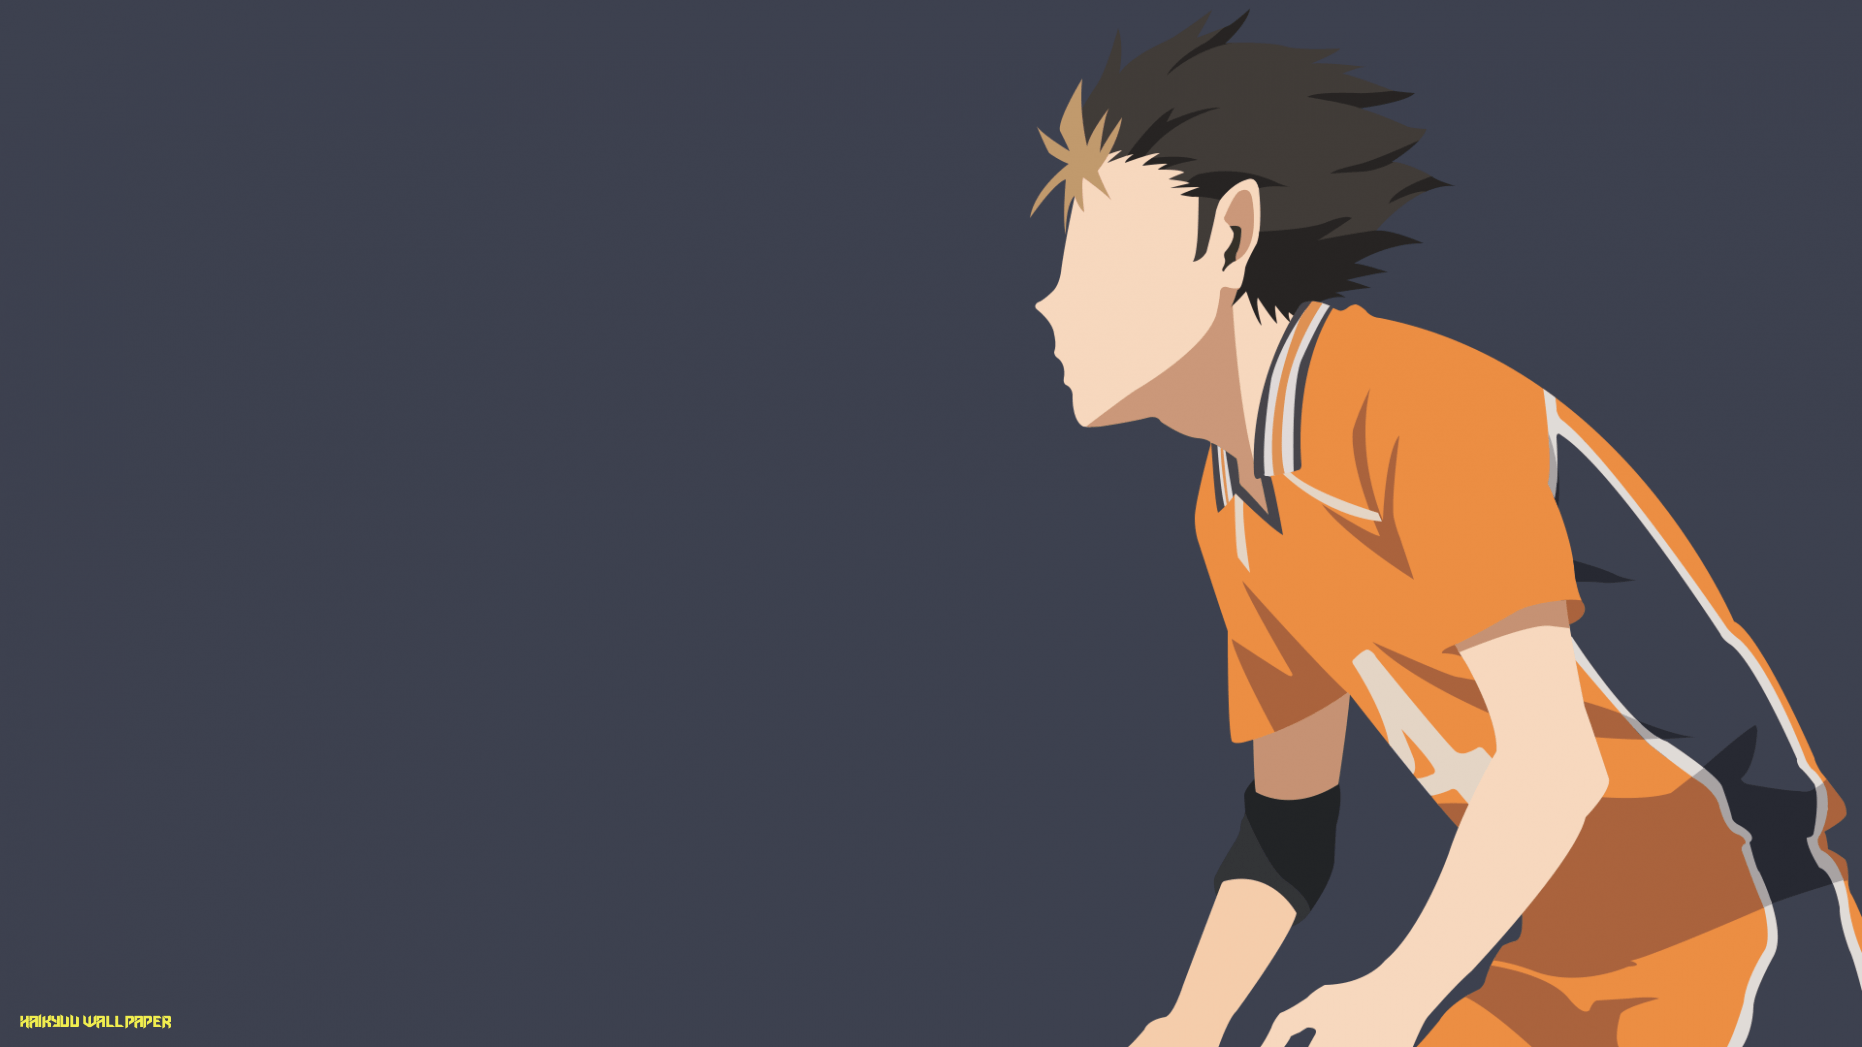 Reasons Why Haikyuu Wallpaper Is Getting More Popular In The Past